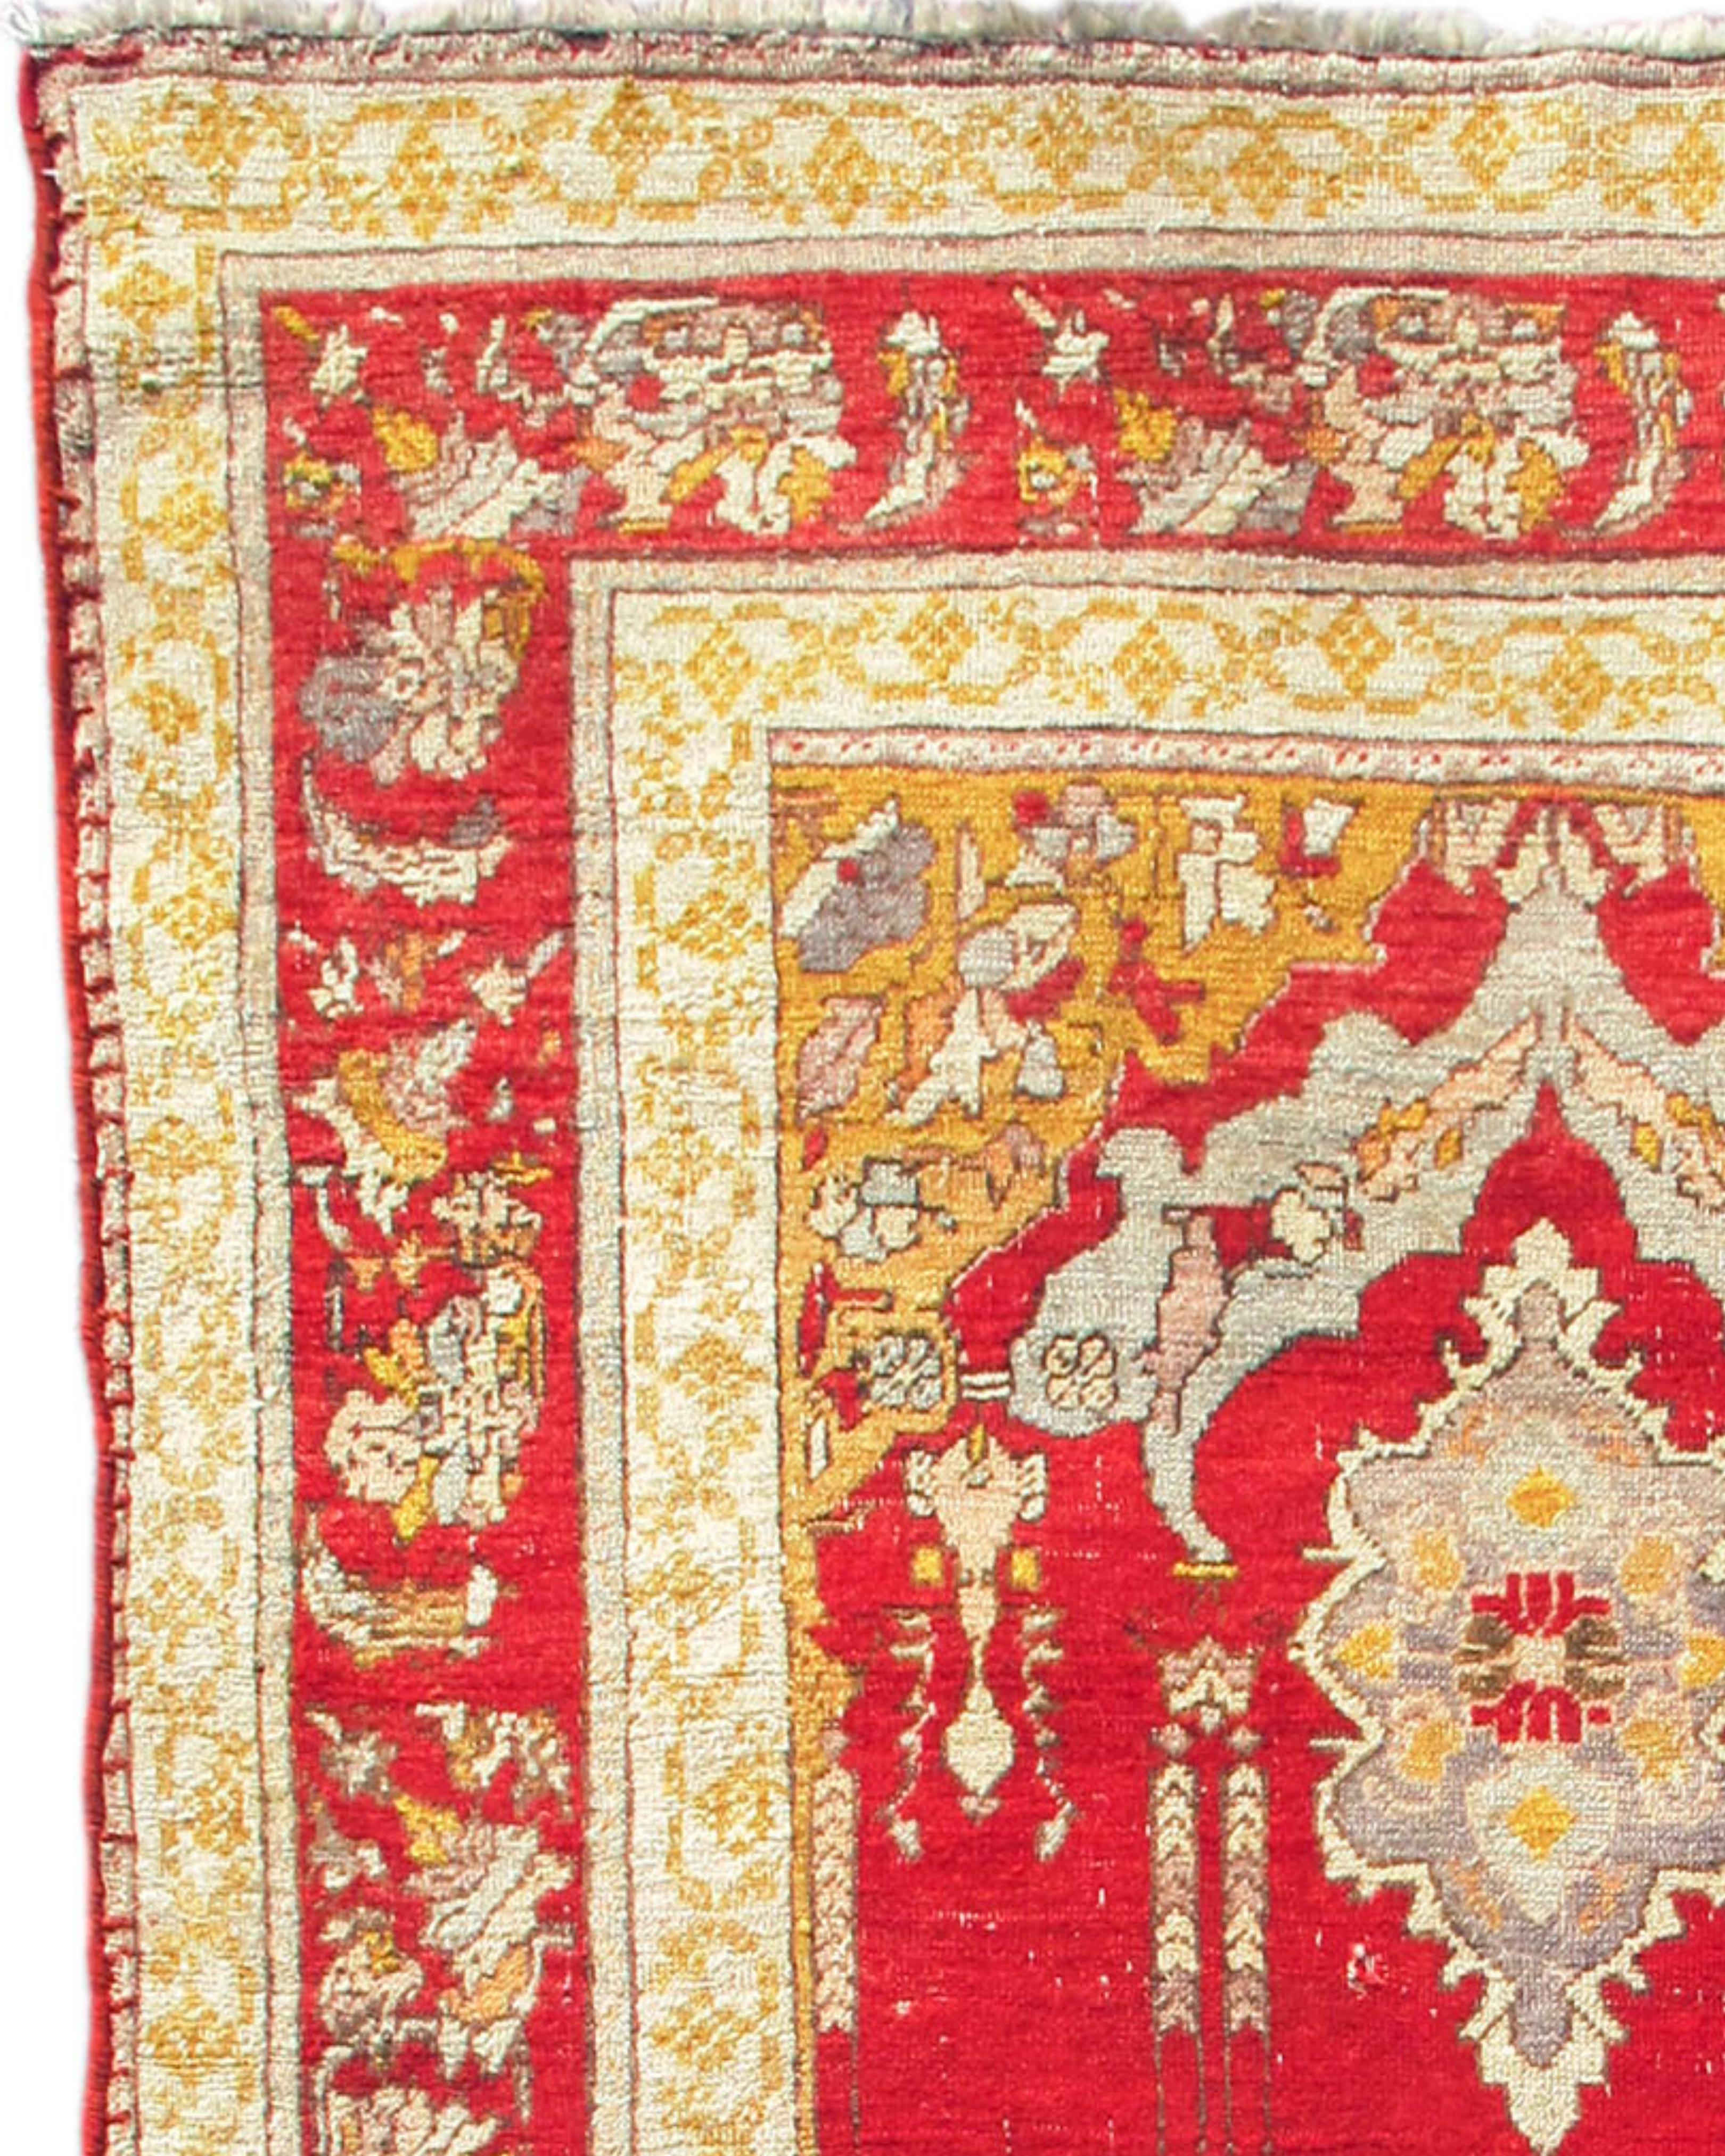 Hand-Woven Antique Turkish Oushak Rug, c. 1900 For Sale